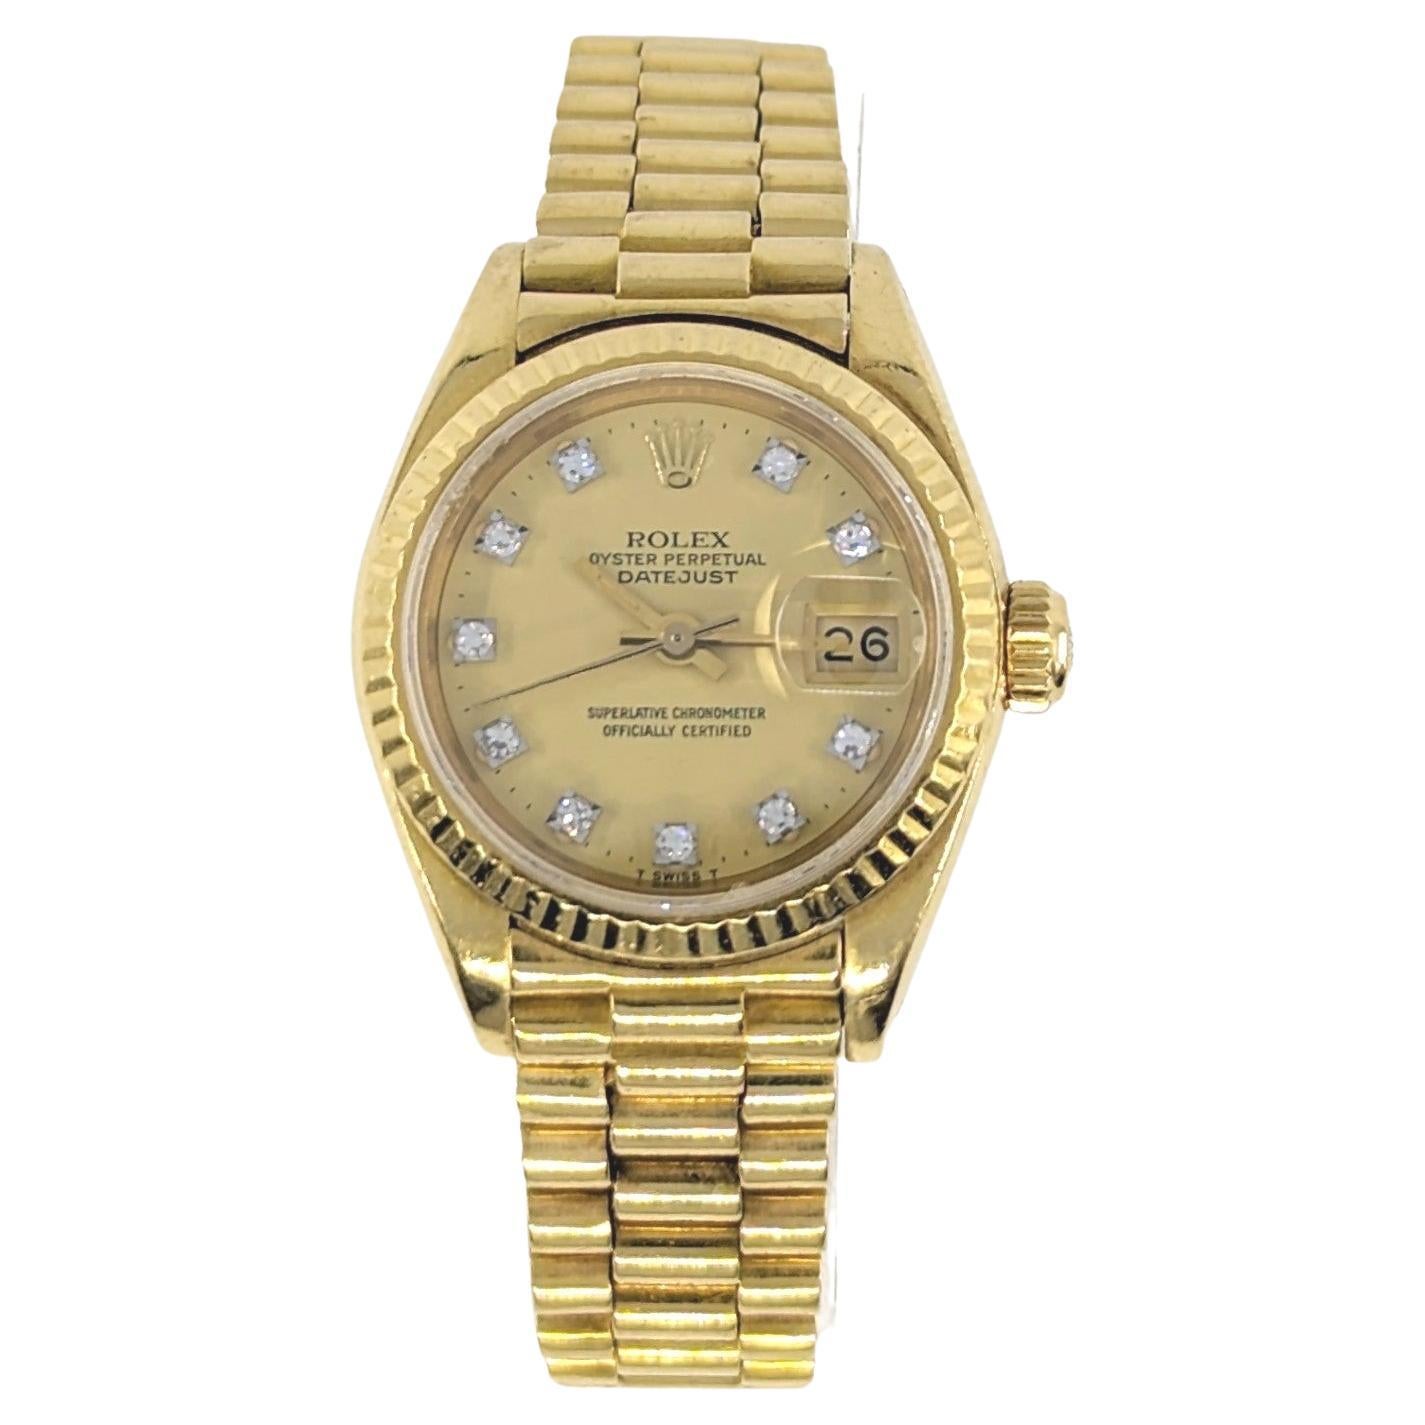 An elegant ladies Rolex with factory diamond dial in solid 18k yellow gold with a solid 18k yellow gold presidential bracelet, hidden clasp. The Rolex dial is gold, set with diamond markers. The Swiss made Rolex quickset movement is automatic